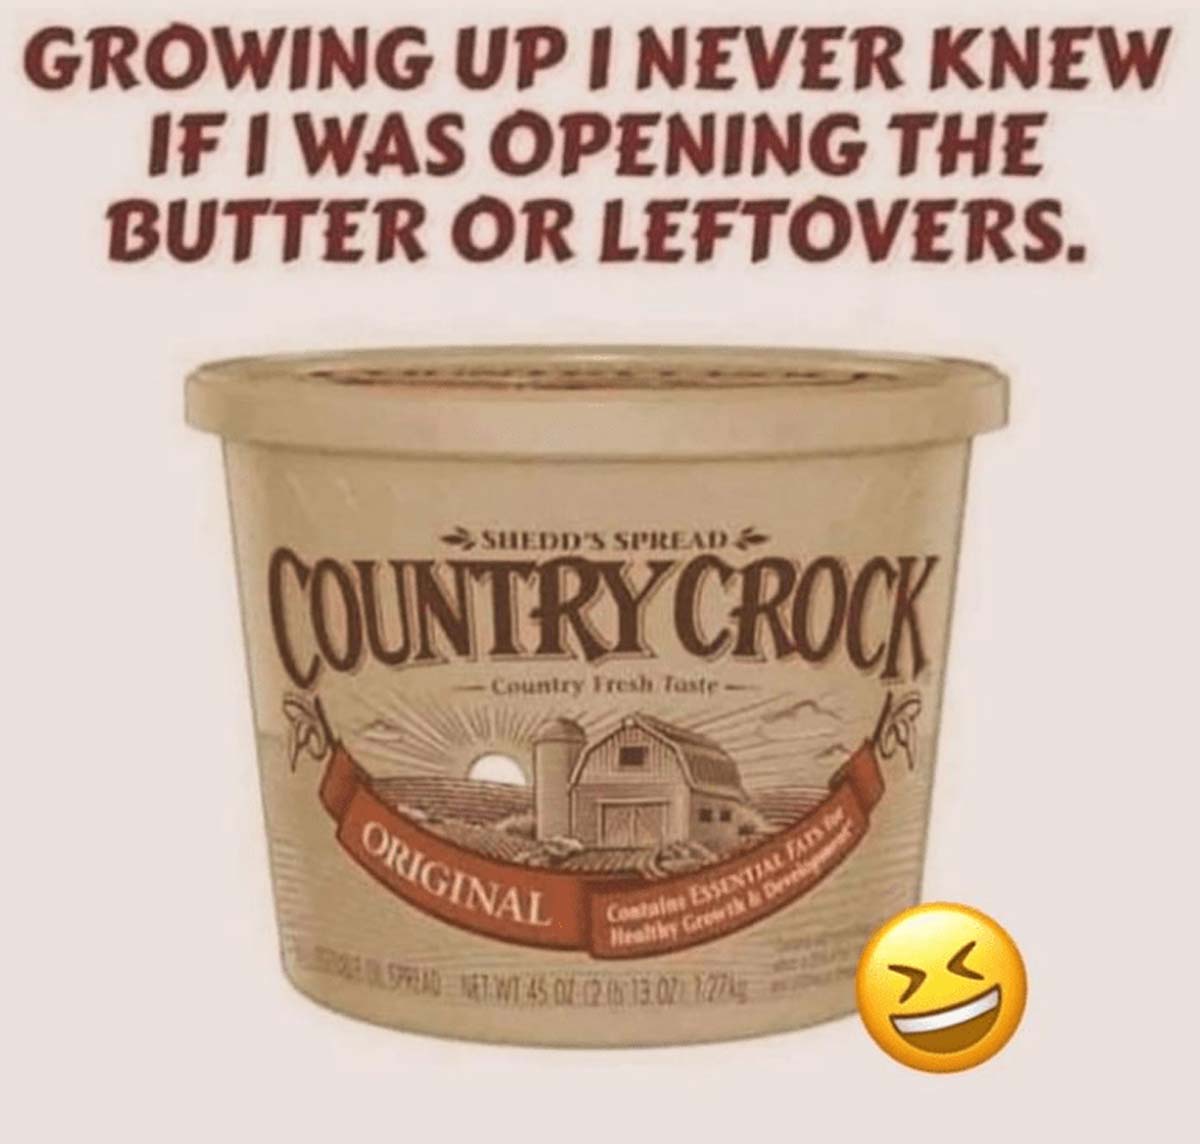 gelato - Growing Up I Never Knew If I Was Opening The Butter Or Leftovers. Shedd'S Spread Country Crock Country Fresh Taste Original Containe Essential Fats Healthy Growth & Develop Spread Net Wt 45 0 125 13.07 127